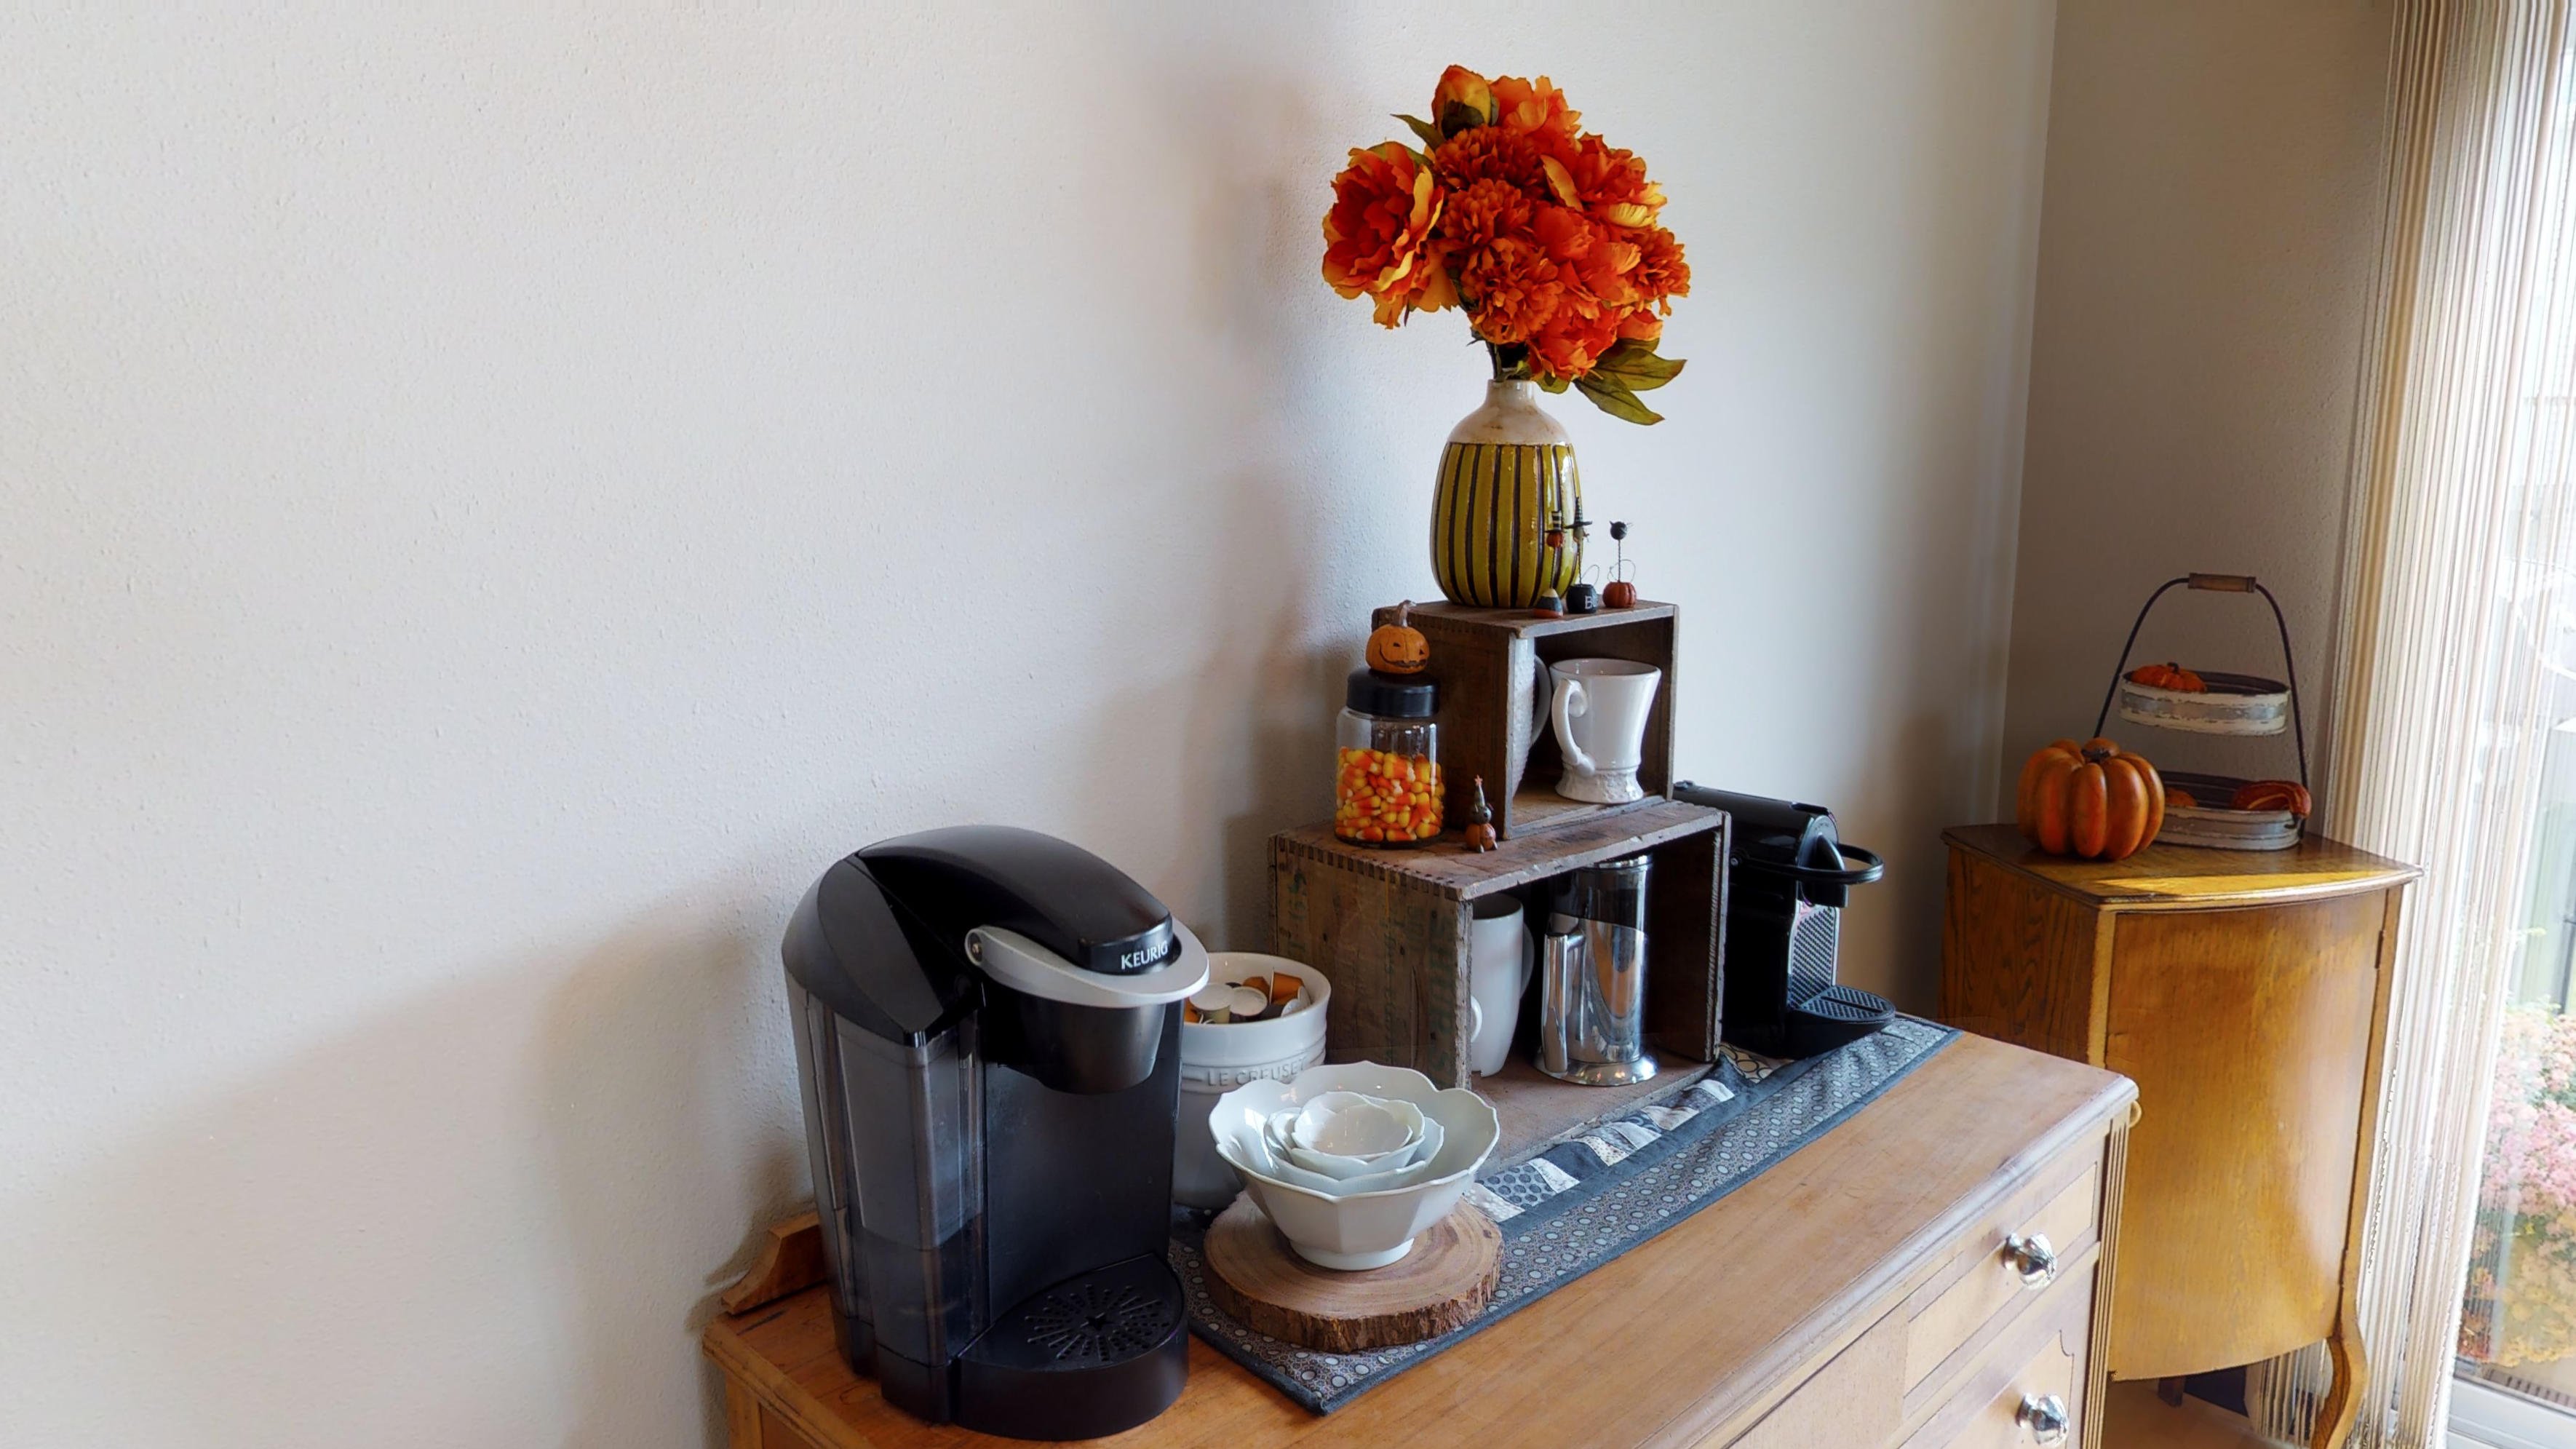 How one resident transformed their townhome for fall